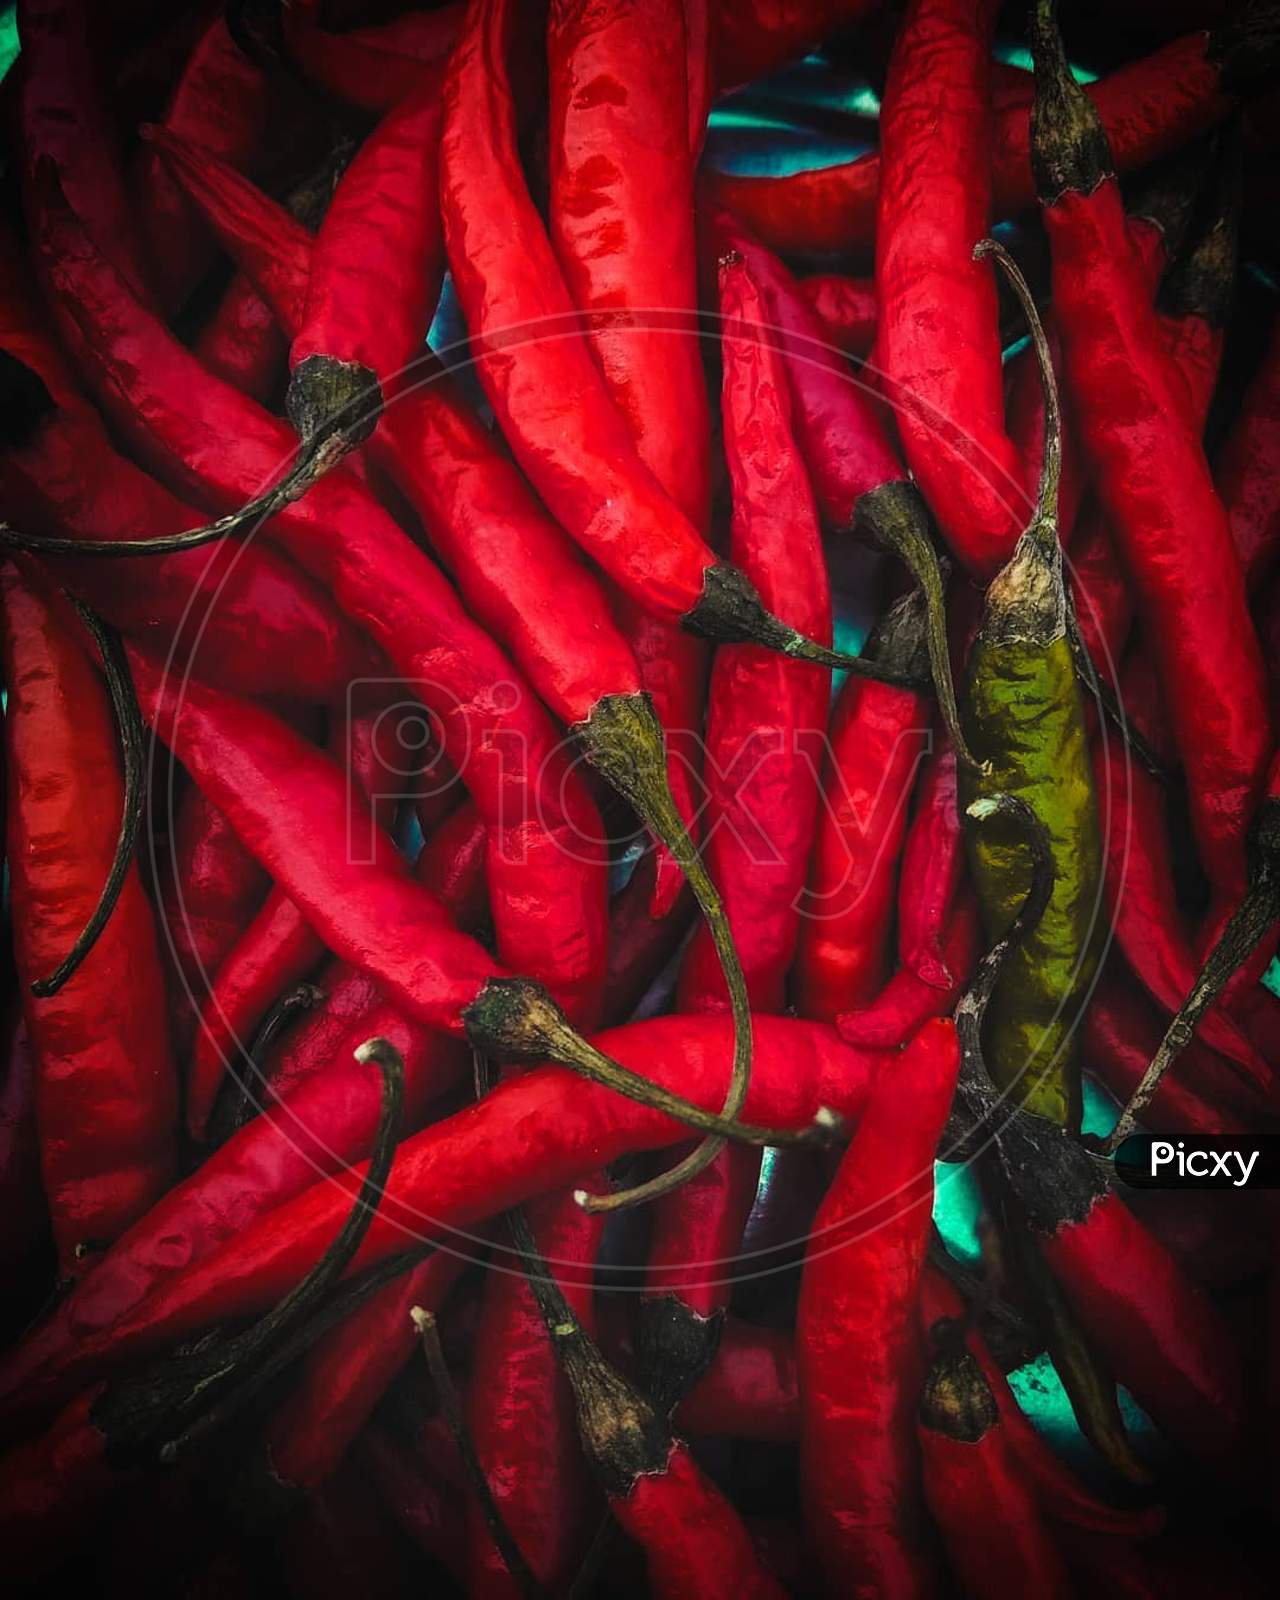 Heap of red chillis in market place